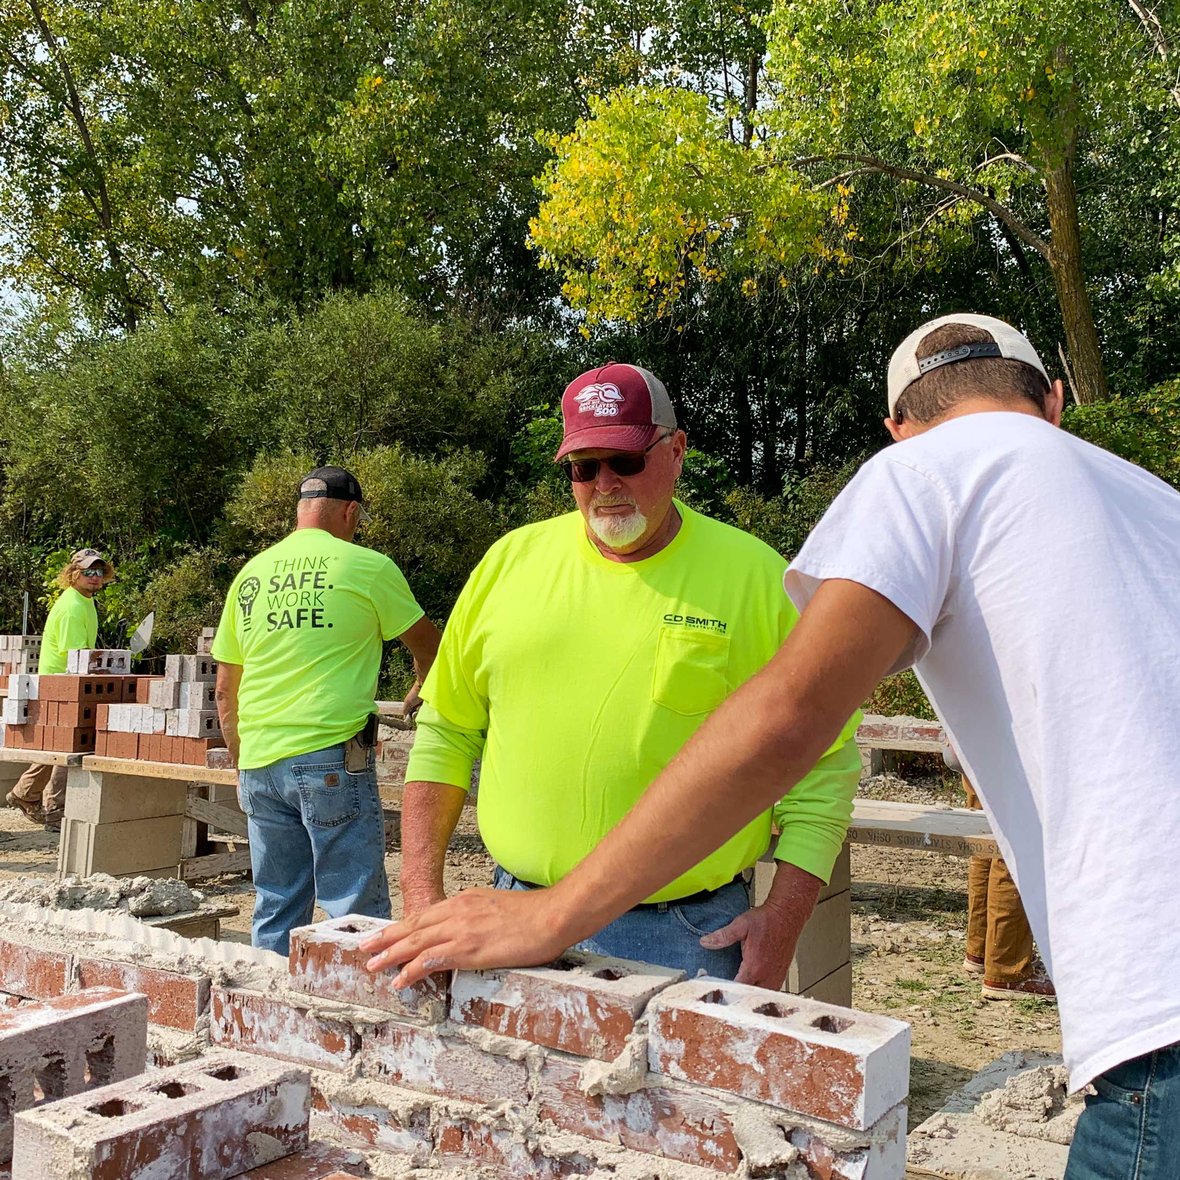 C.D. Smith Construction Workers doing hands-on masonry training at the Bricklayer 500